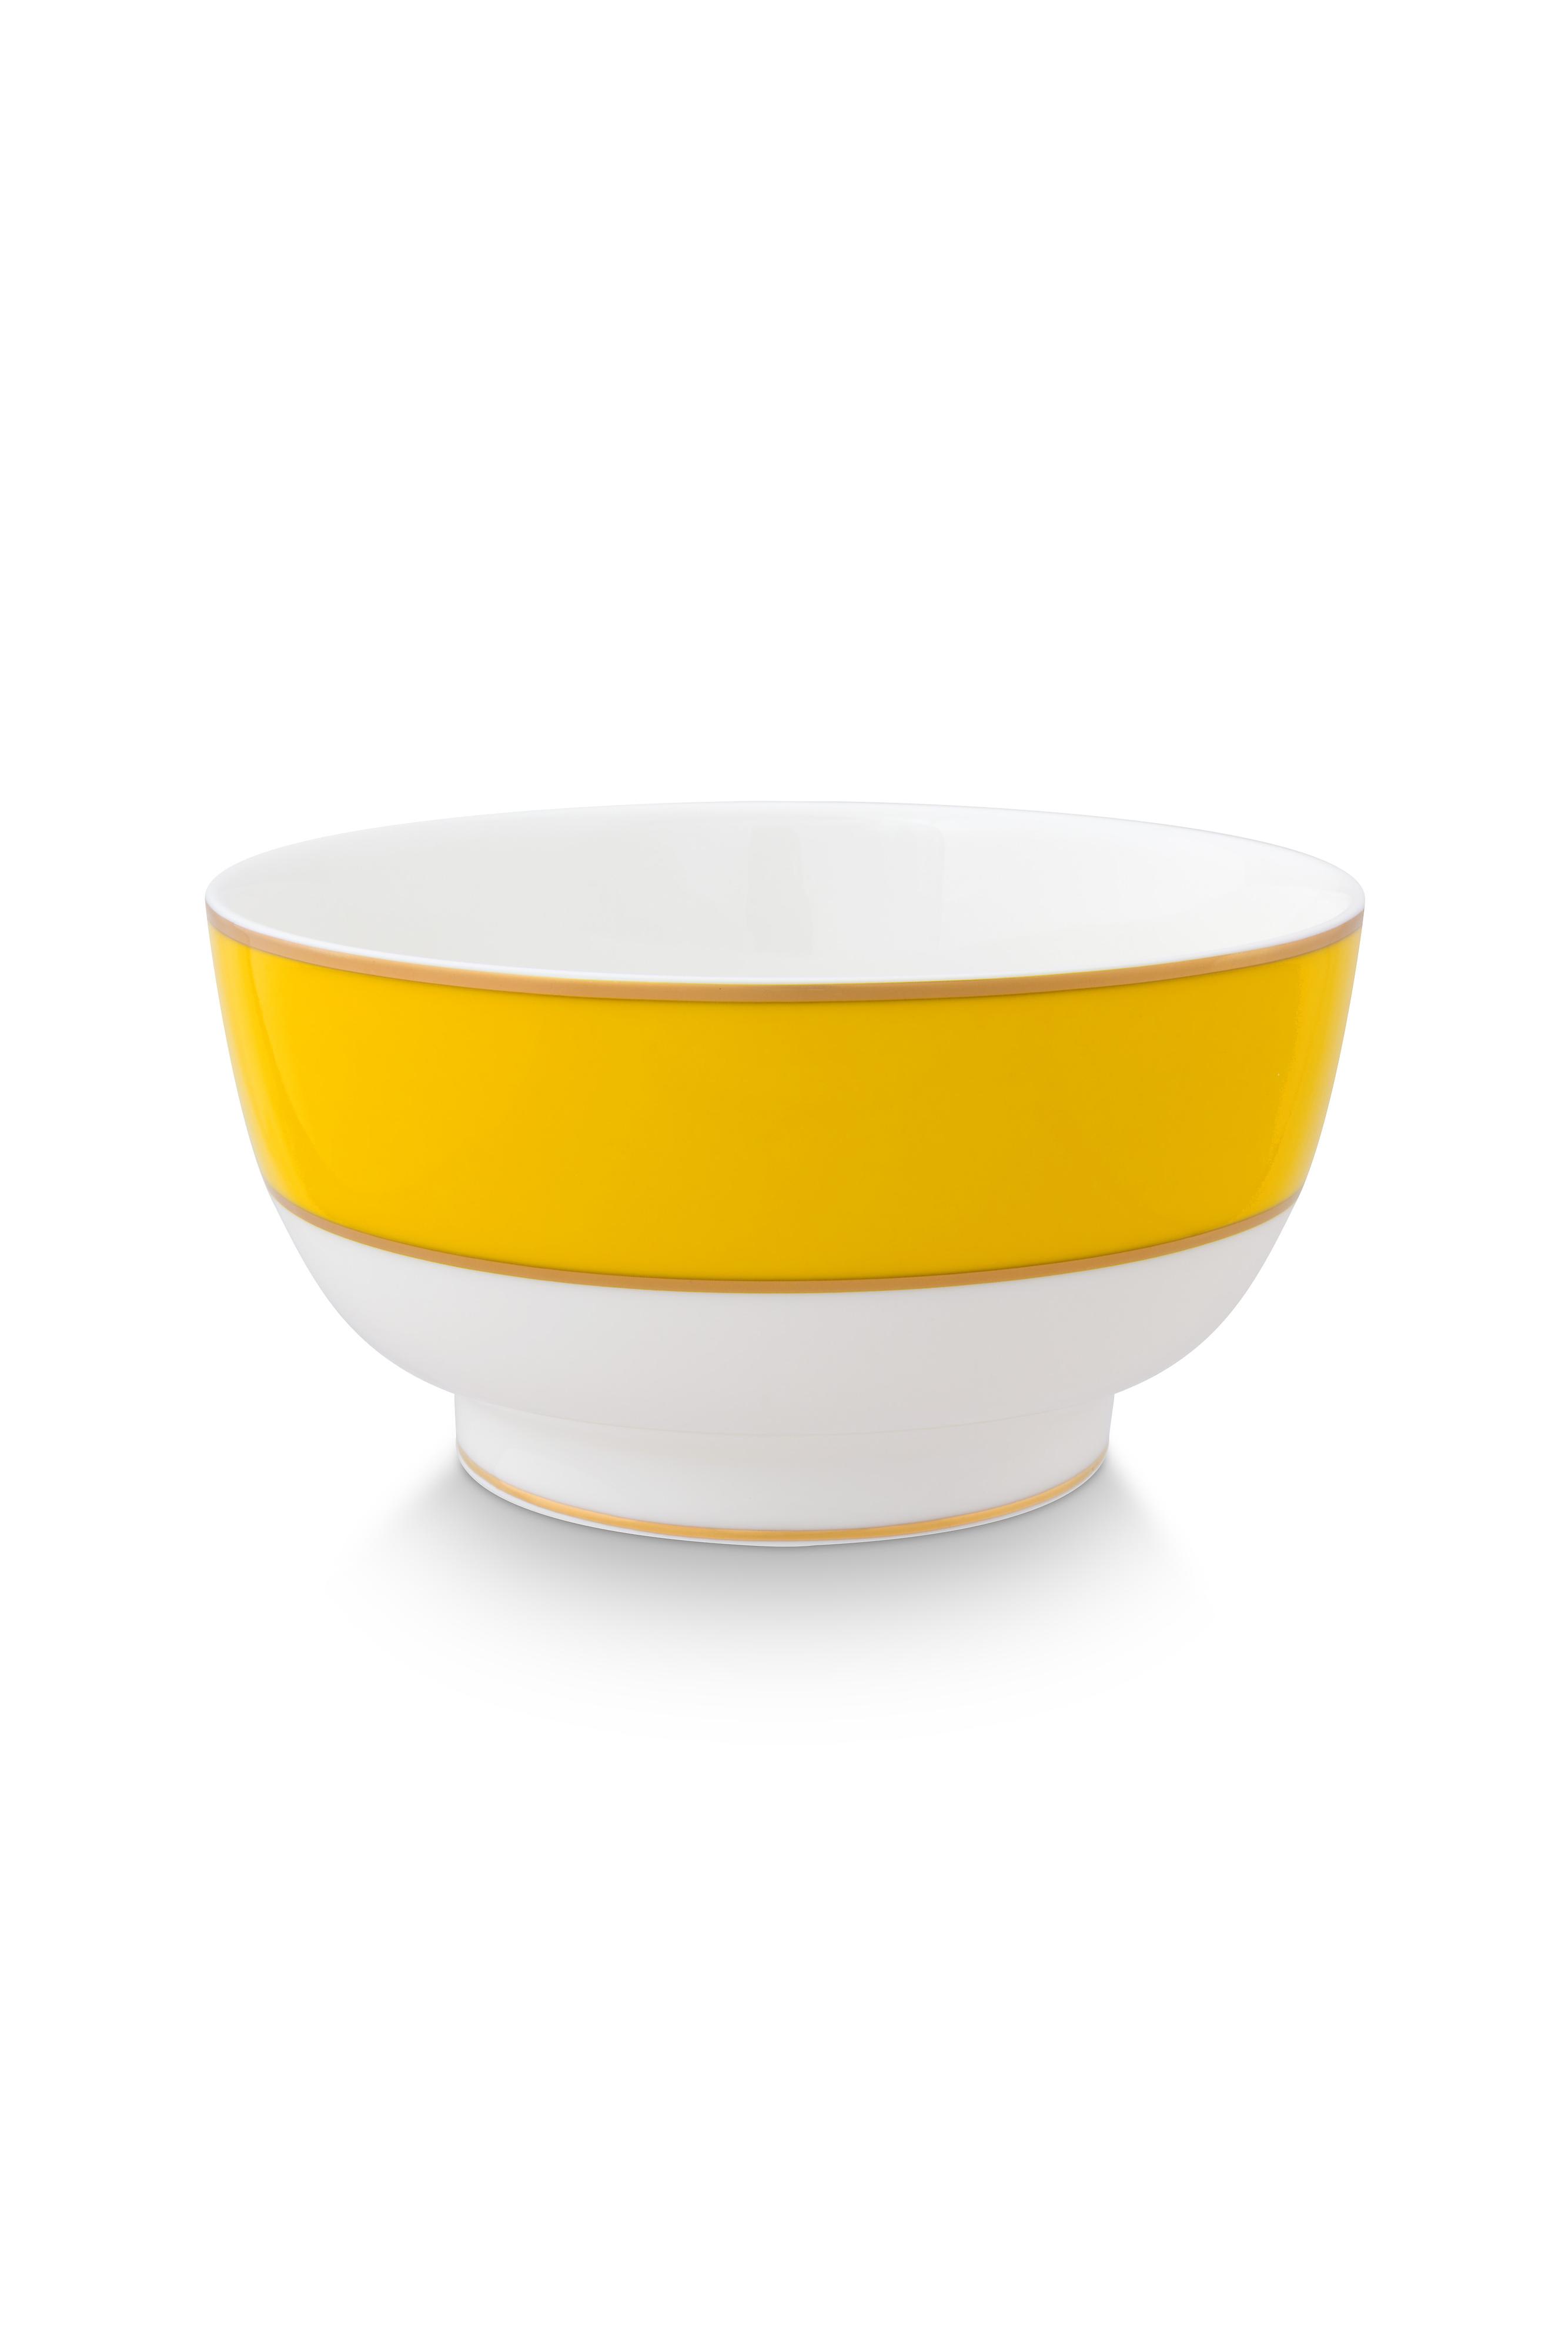 Bowl Pip Chique Gold-yellow 18cm Gift